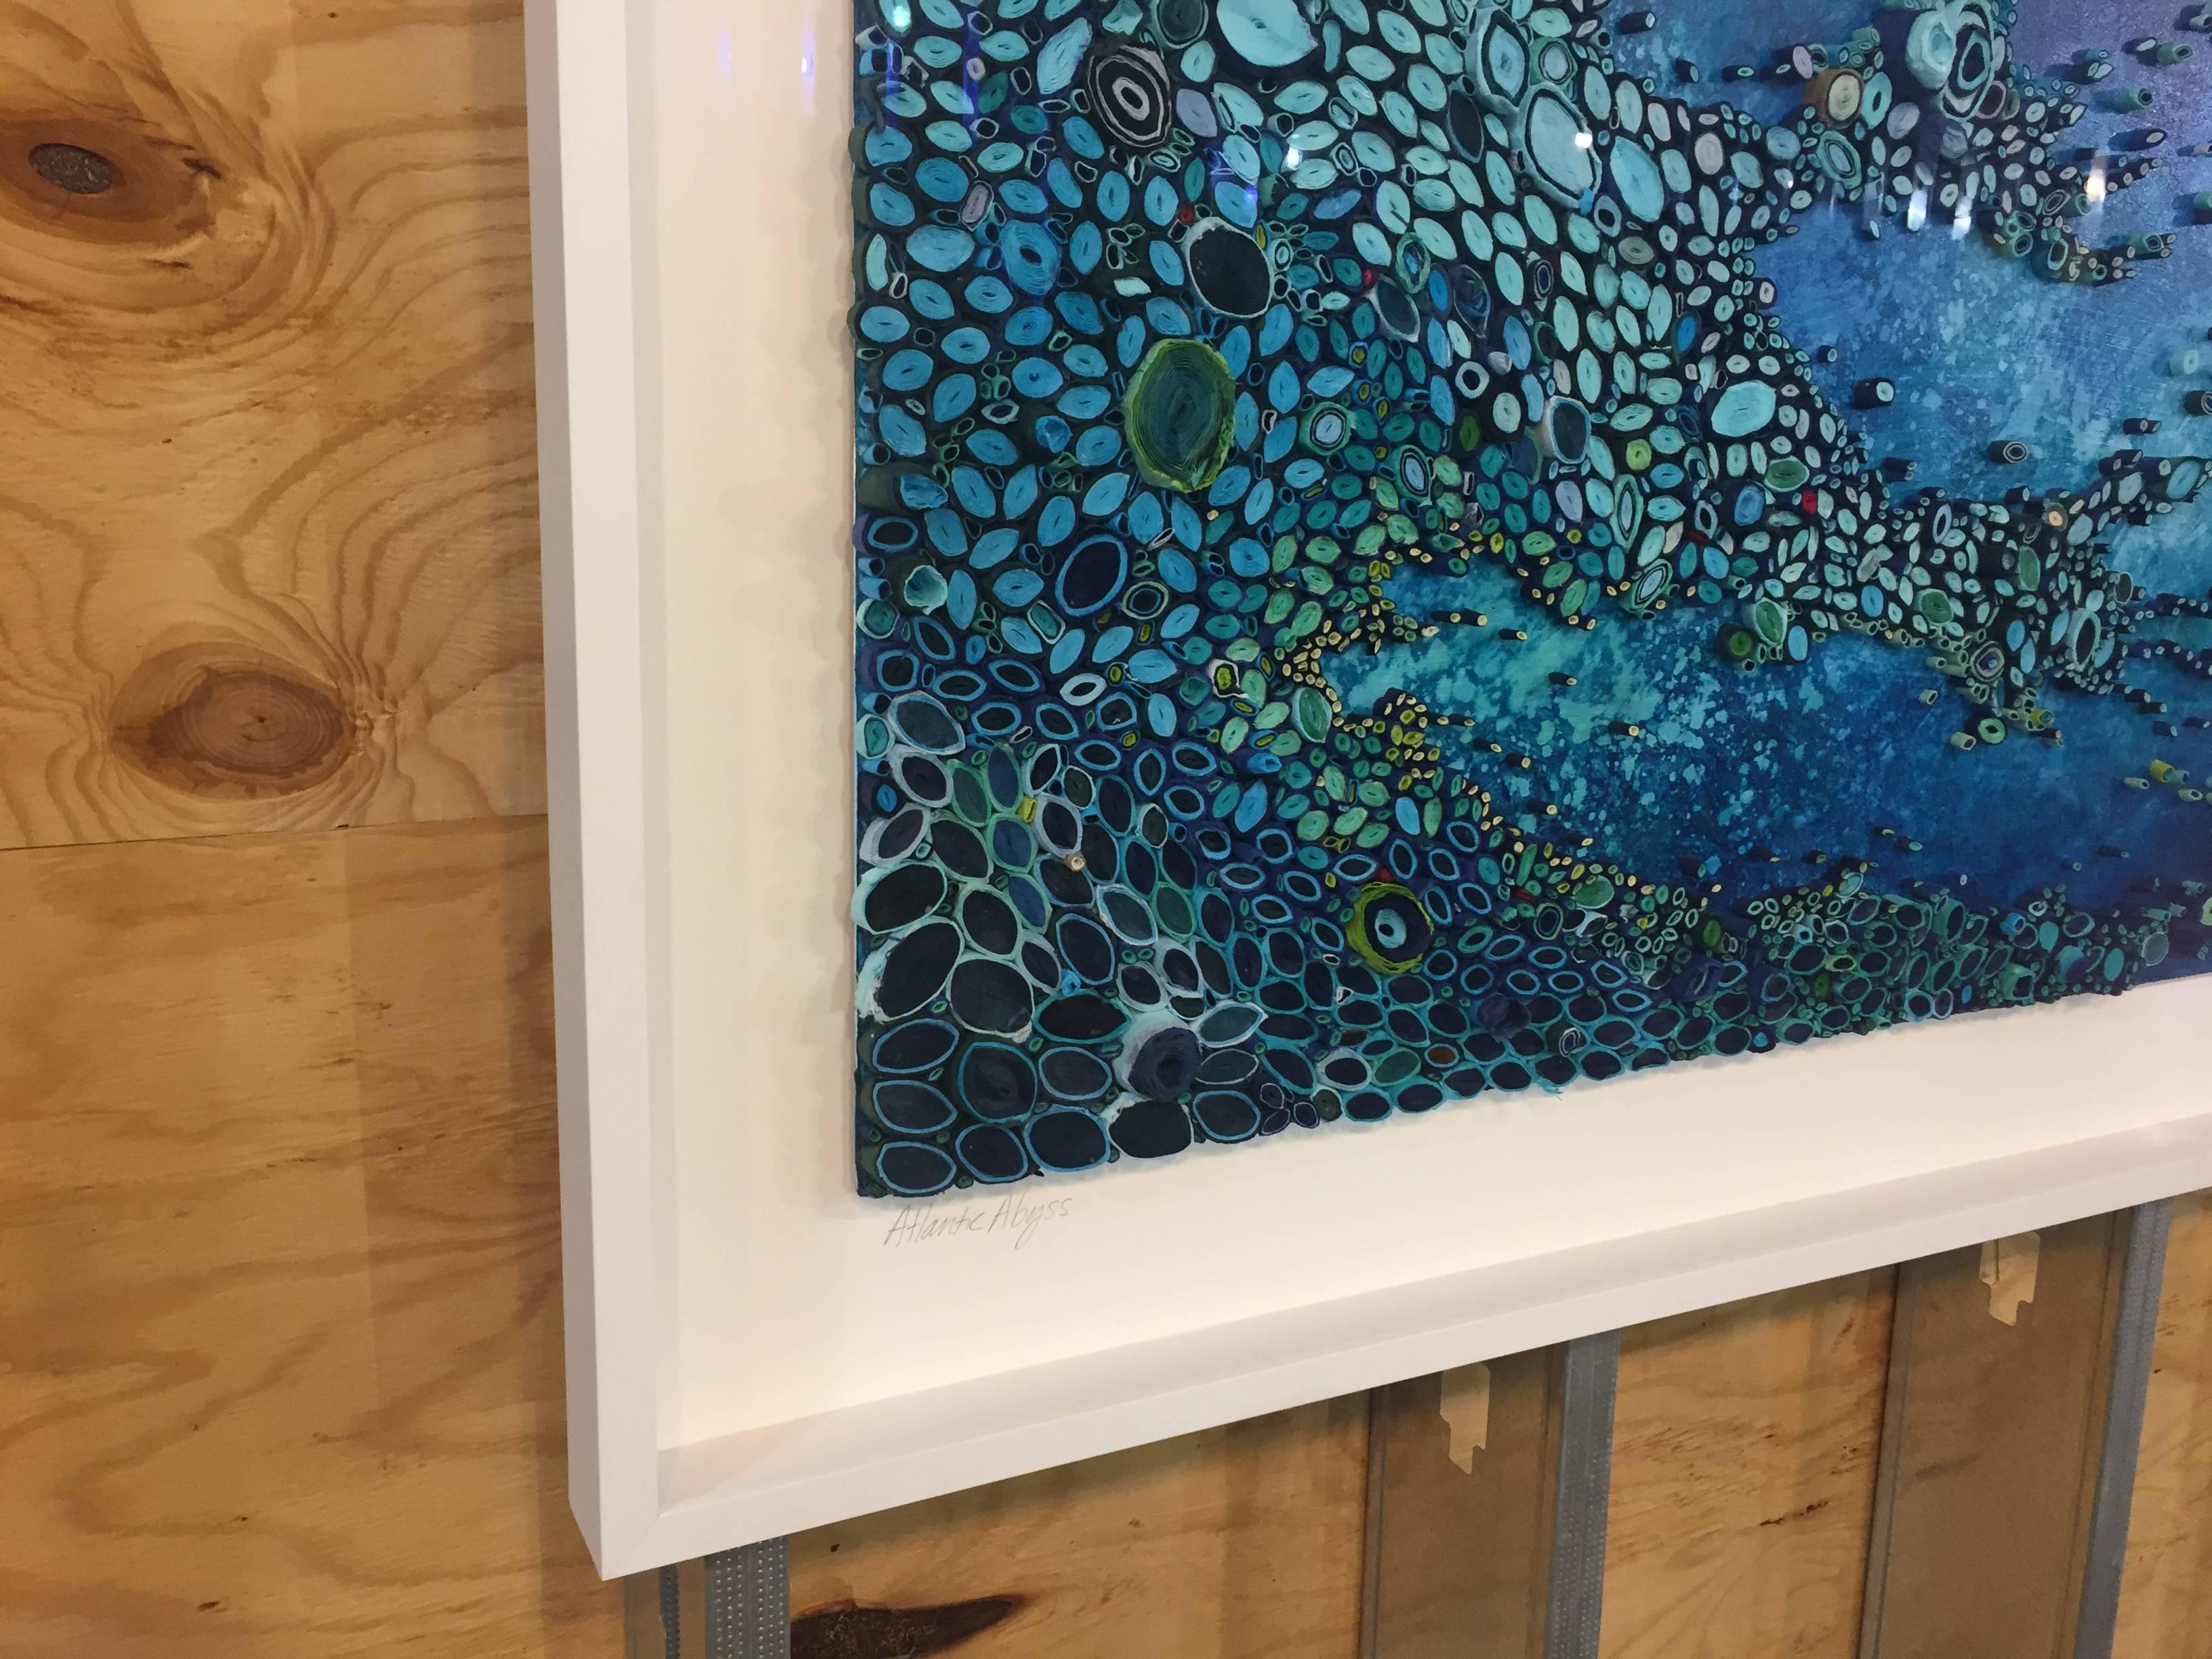 
Mixed Media artist Amy Genser makes dimensional paper collages. These colorful, textural, one-of-a-kind wall pieces embody movement and processes. She masterfully manipulates paper -- each piece being cut, rolled and stacked -- to mimic organic